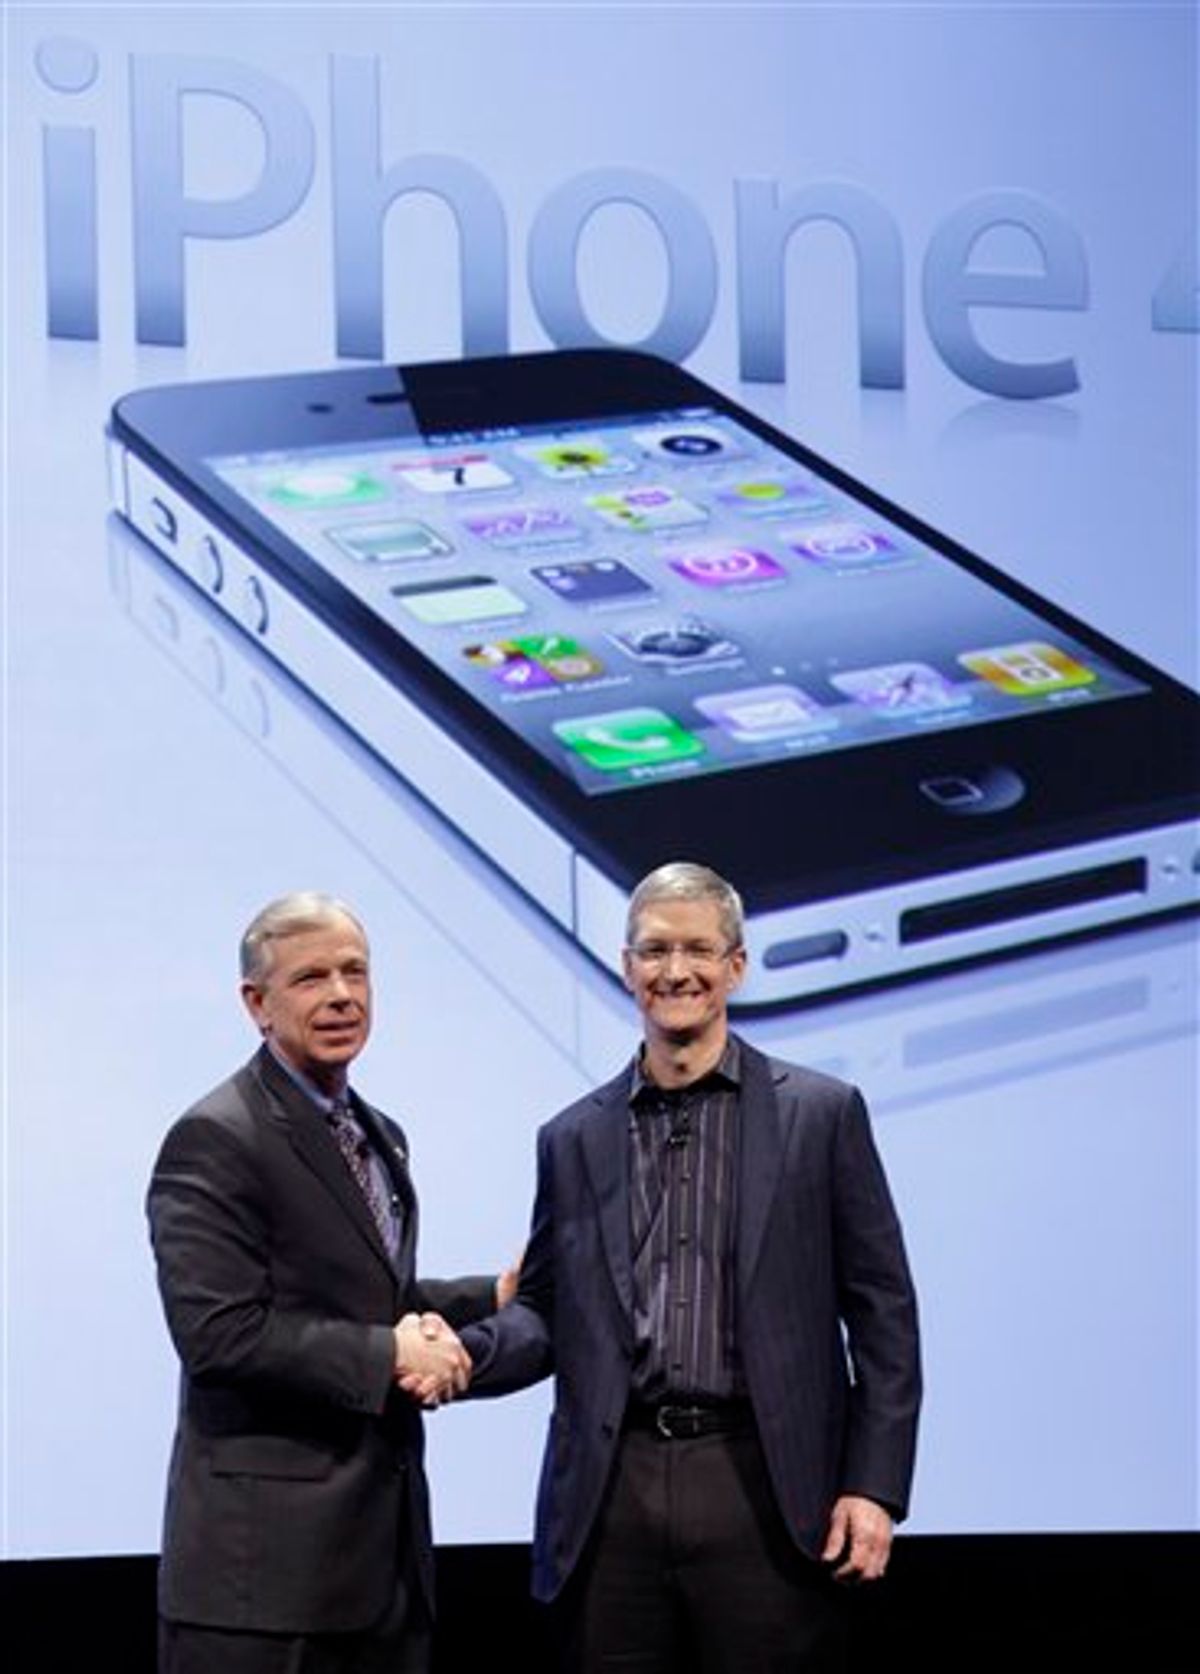 Lowell McAdam, left, Verizon President and COO, and Tim Cook, COO of Apple, announce that Verizon Wireless will carry Apple's iPhone, Tuesday, Jan. 11, 2011 in New York.  Verizon Wireless and Apple@ today announced that the iPhone@ 4 will be available on the Verizon Wireless network beginning on Thursday, February 10. Qualified Verizon Wireless customers will be given the exclusive opportunity to pre-order iPhone 4 online on February 3, ahead of general availability.(AP Photo/Mark Lennihan)   (AP)